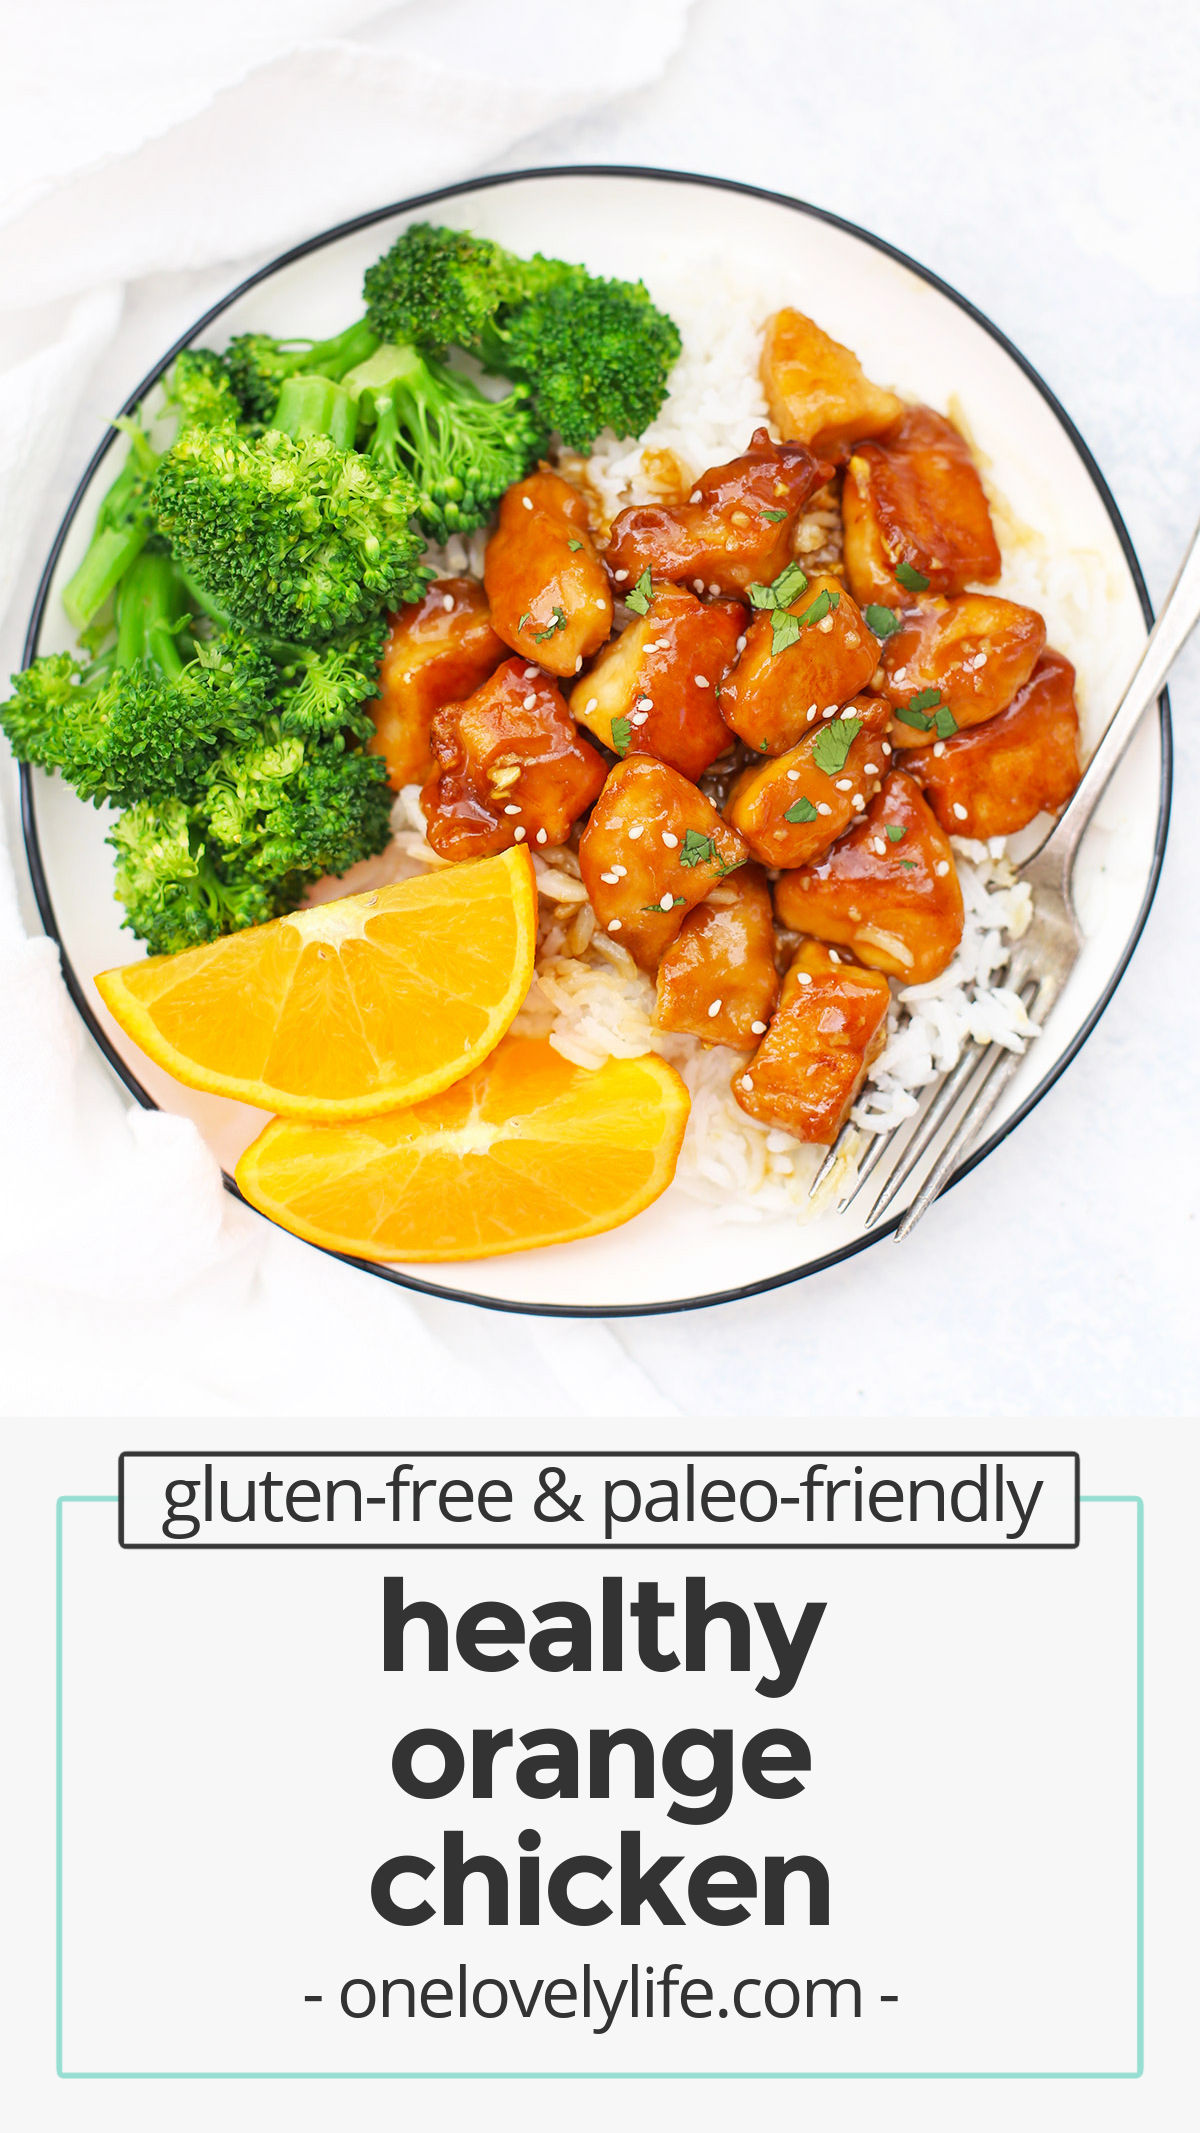 Healthy Orange Chicken (Gluten Free, Paleo Friendly) - Our whole family loves this homemade orange chicken. The chicken is crispy and the sauce is delicious! // Orange chicken recipe // paleo orange chicken // gluten free orange chicken // healthy dinner // takeout fake out // healthy orange chicken recipe // paleo dinner // healthy dinner // orange chicken sauce